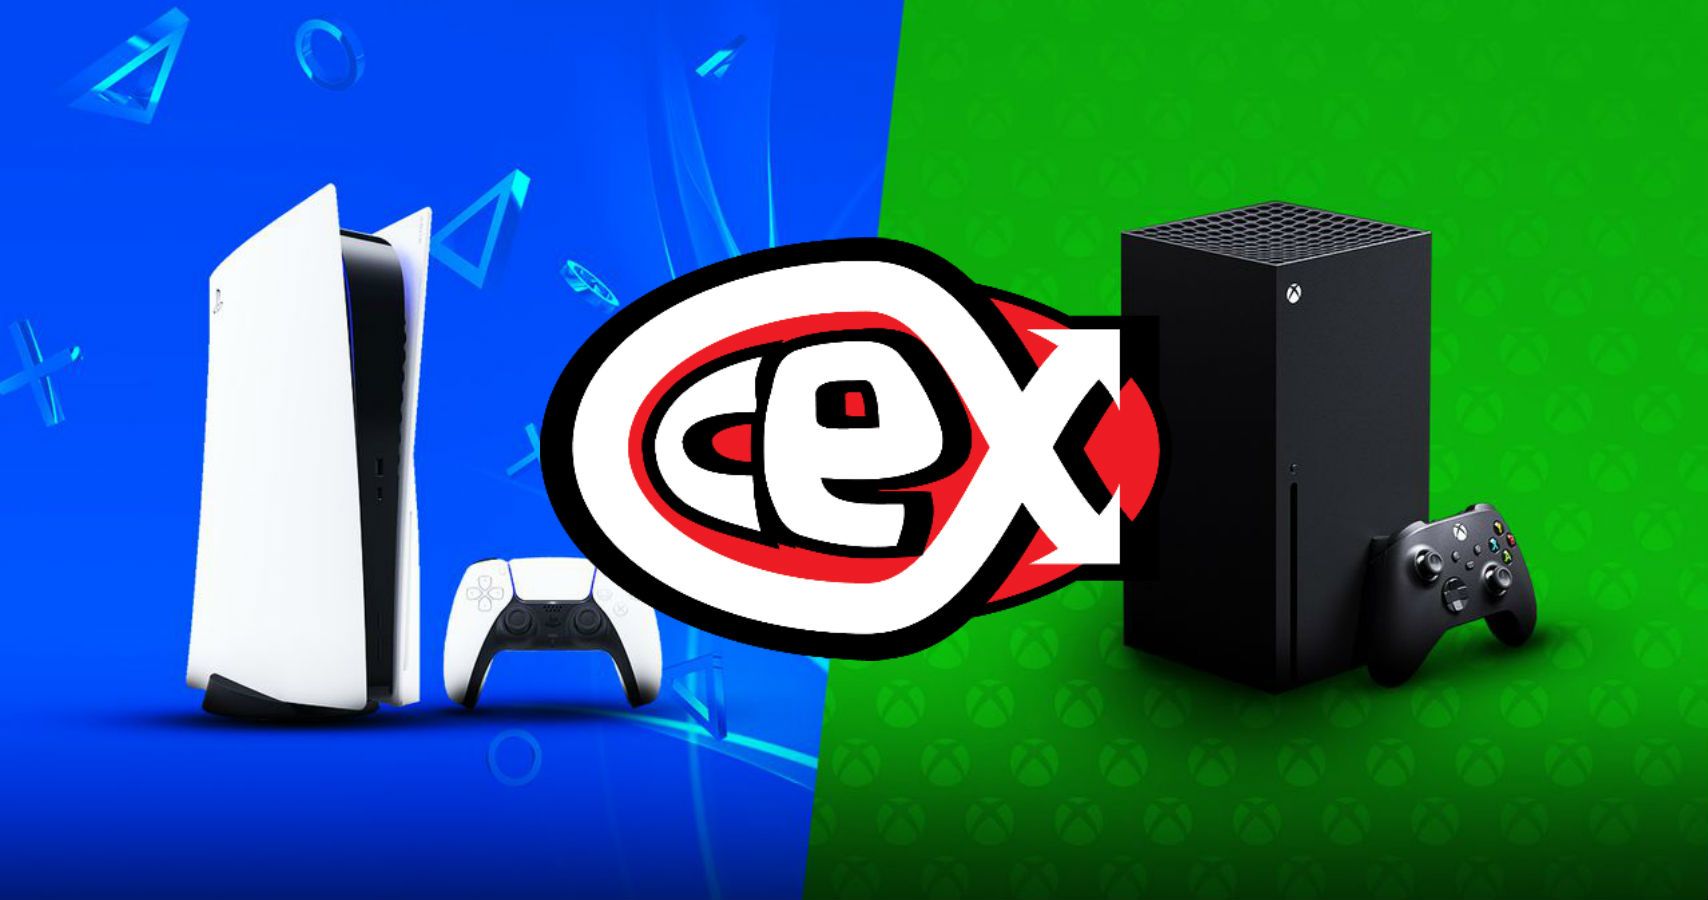 cex ps4 used